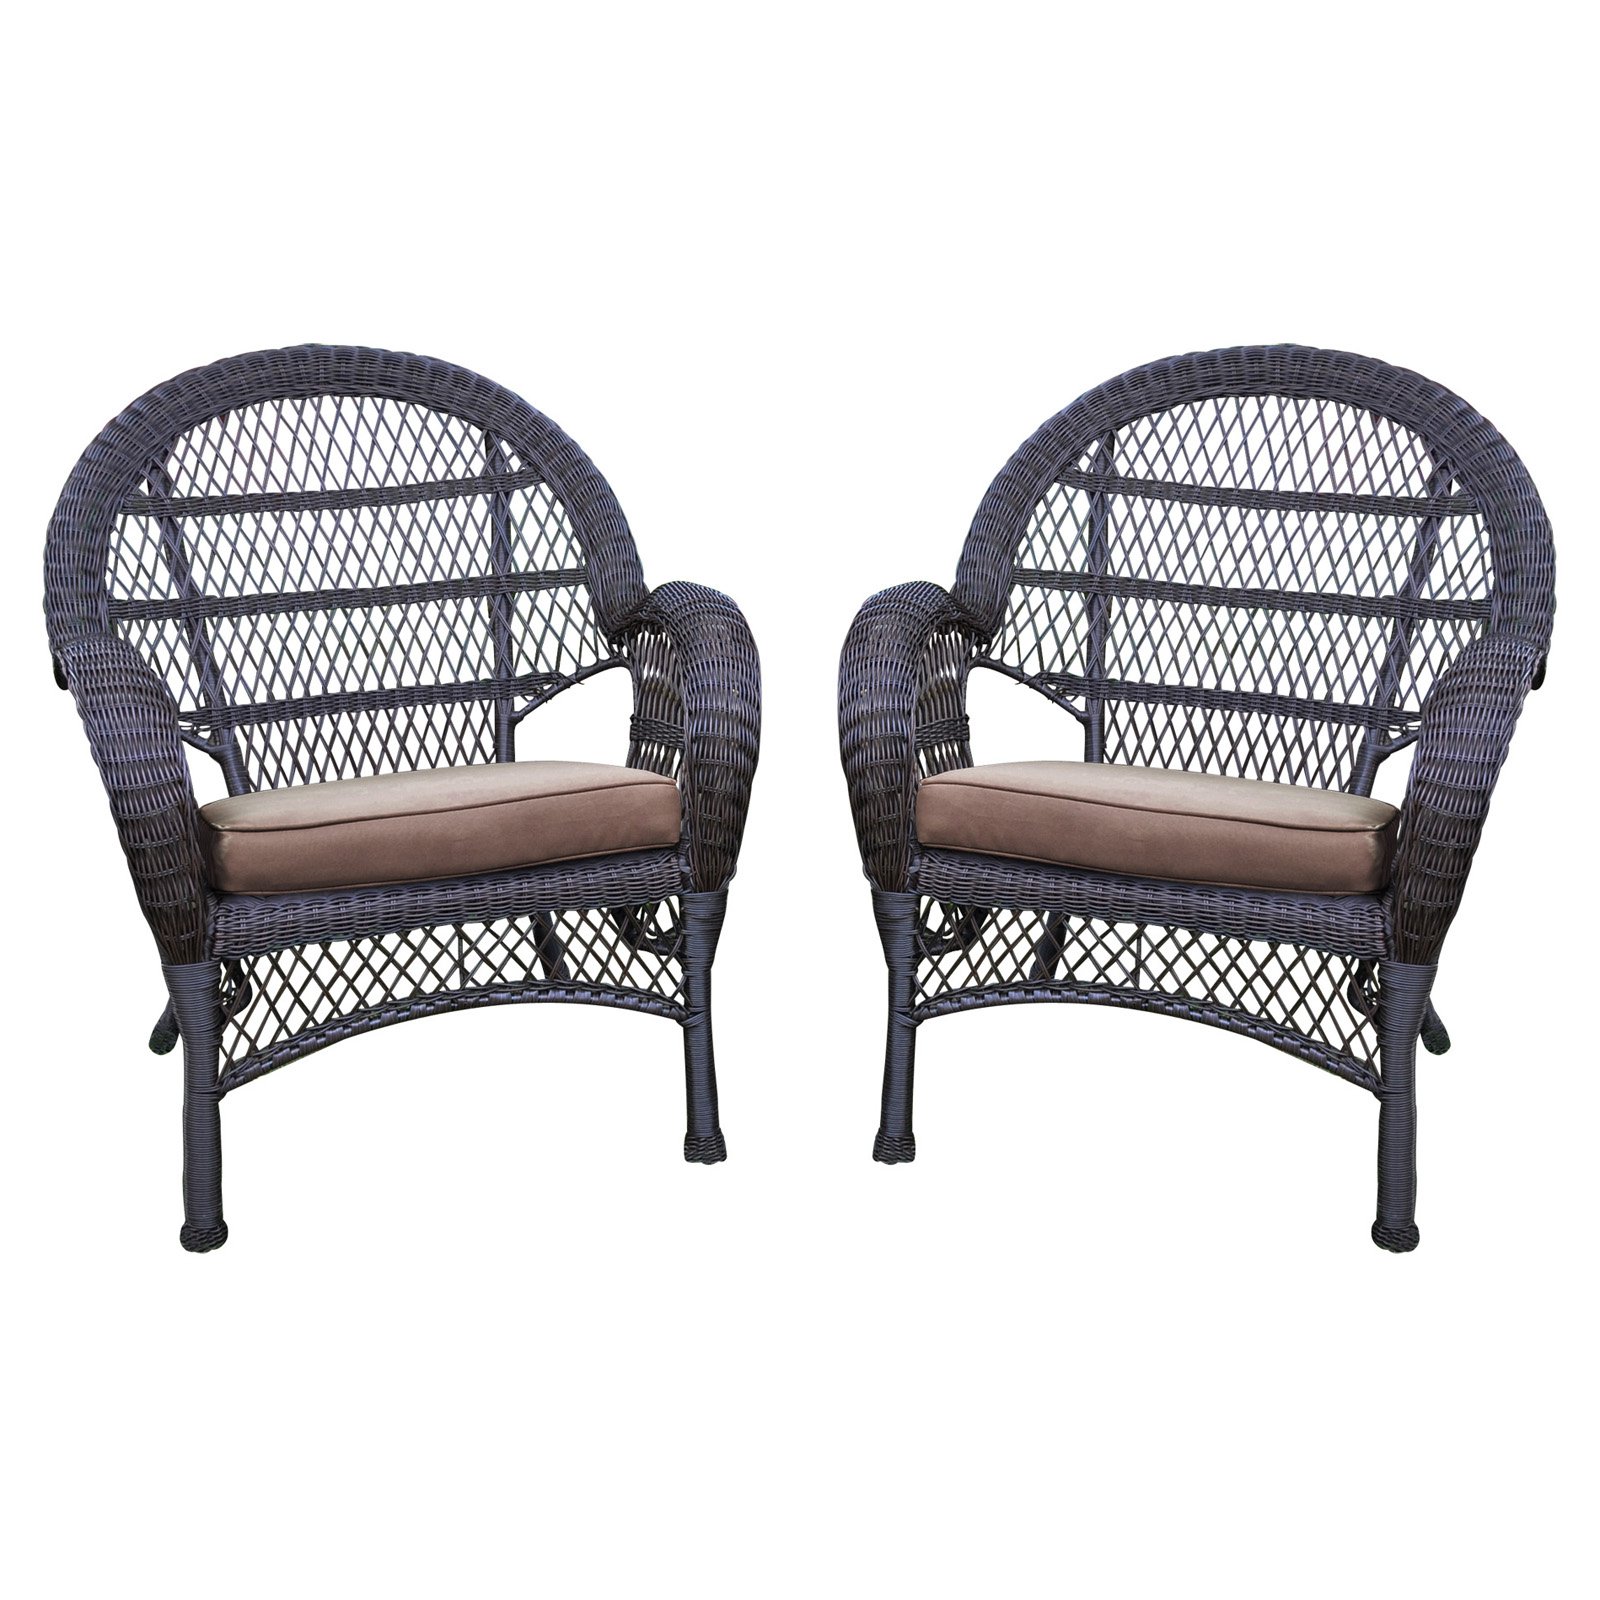 Jeco Wicker Chair in Espresso with Brown Cushion (Set of 4) - image 1 of 11